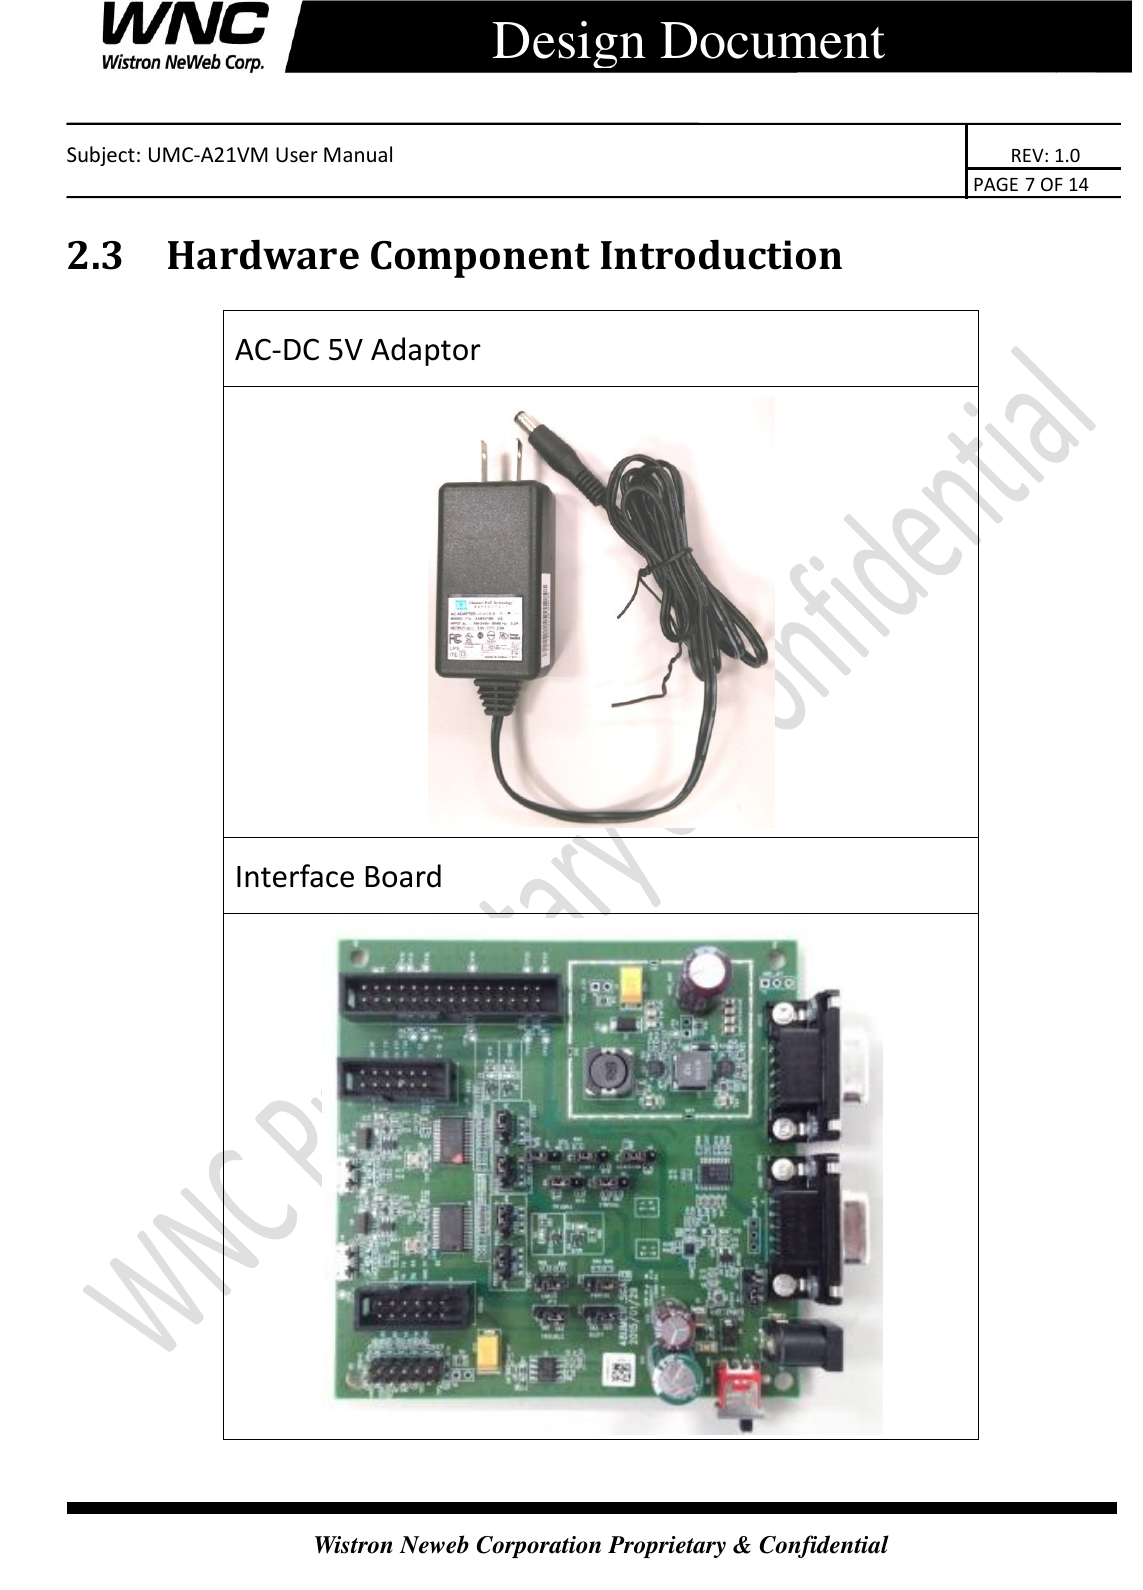    Subject: UMC-A21VM User Manual                                                                      REV: 1.0                                                                                        PAGE 7 OF 14  Wistron Neweb Corporation Proprietary &amp; Confidential      Design Document 2.3 Hardware Component Introduction AC-DC 5V Adaptor  Interface Board  